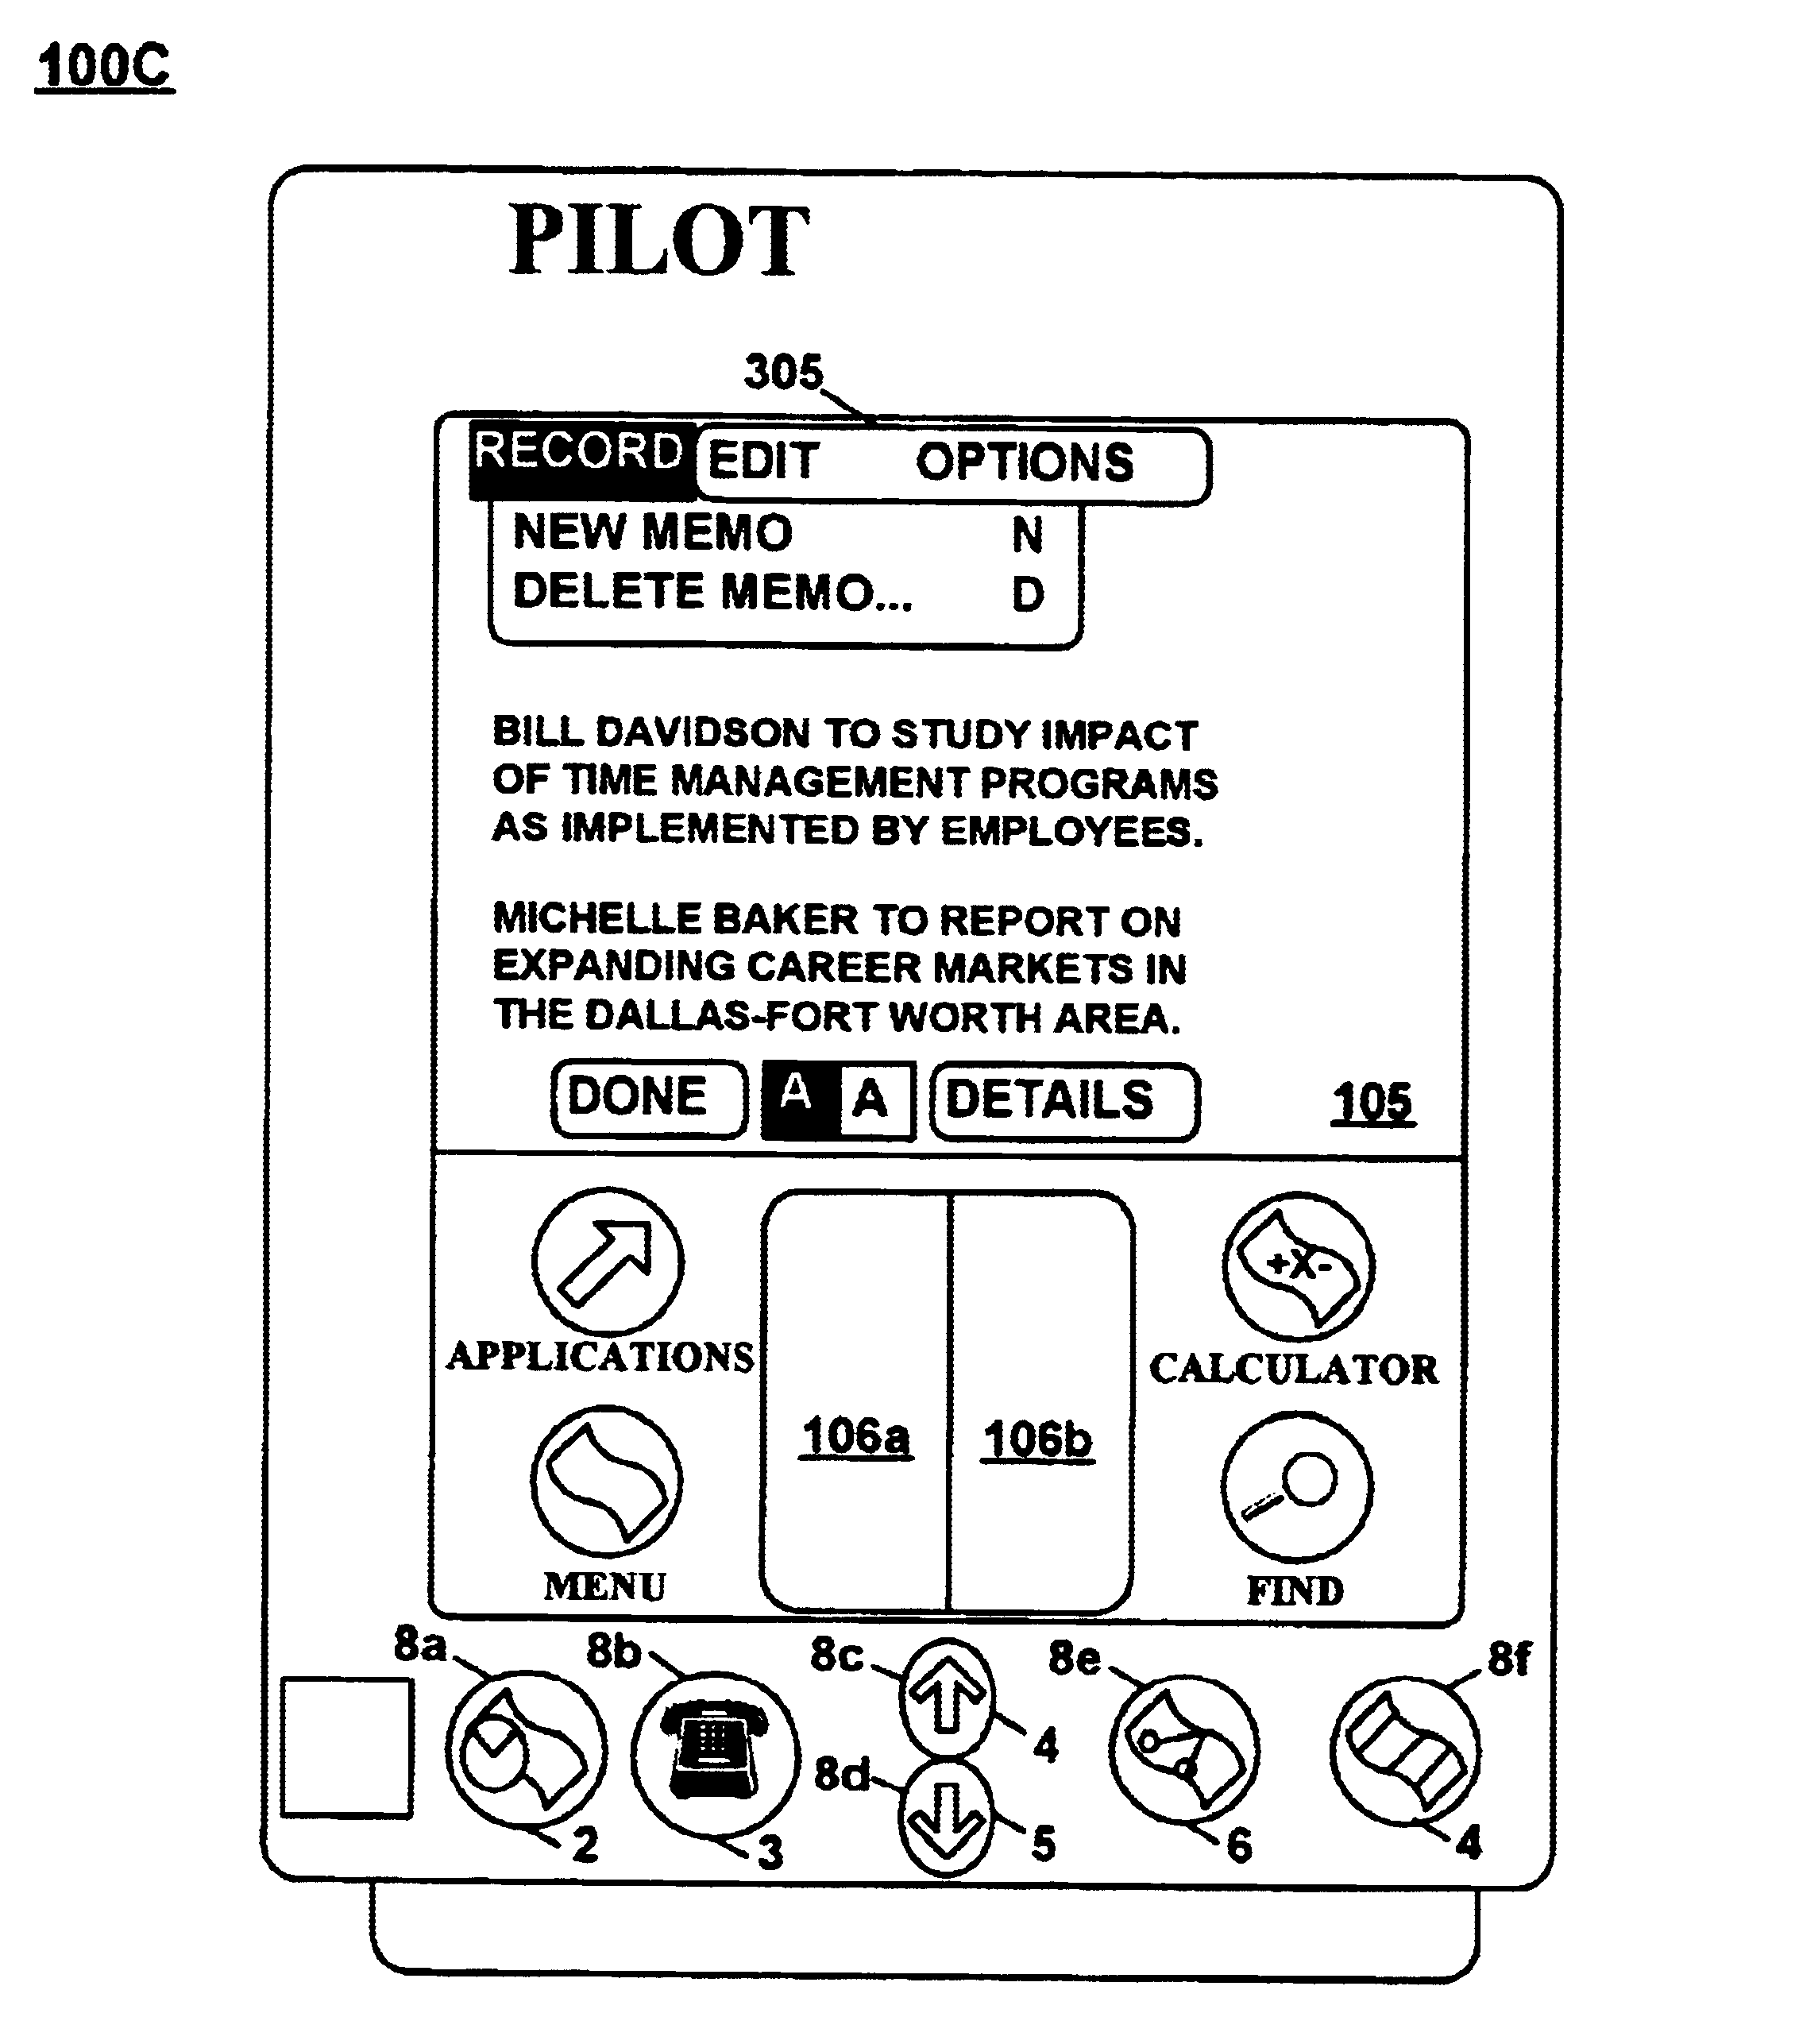 Illuminatable buttons and method for indicating information using illuminatable buttons